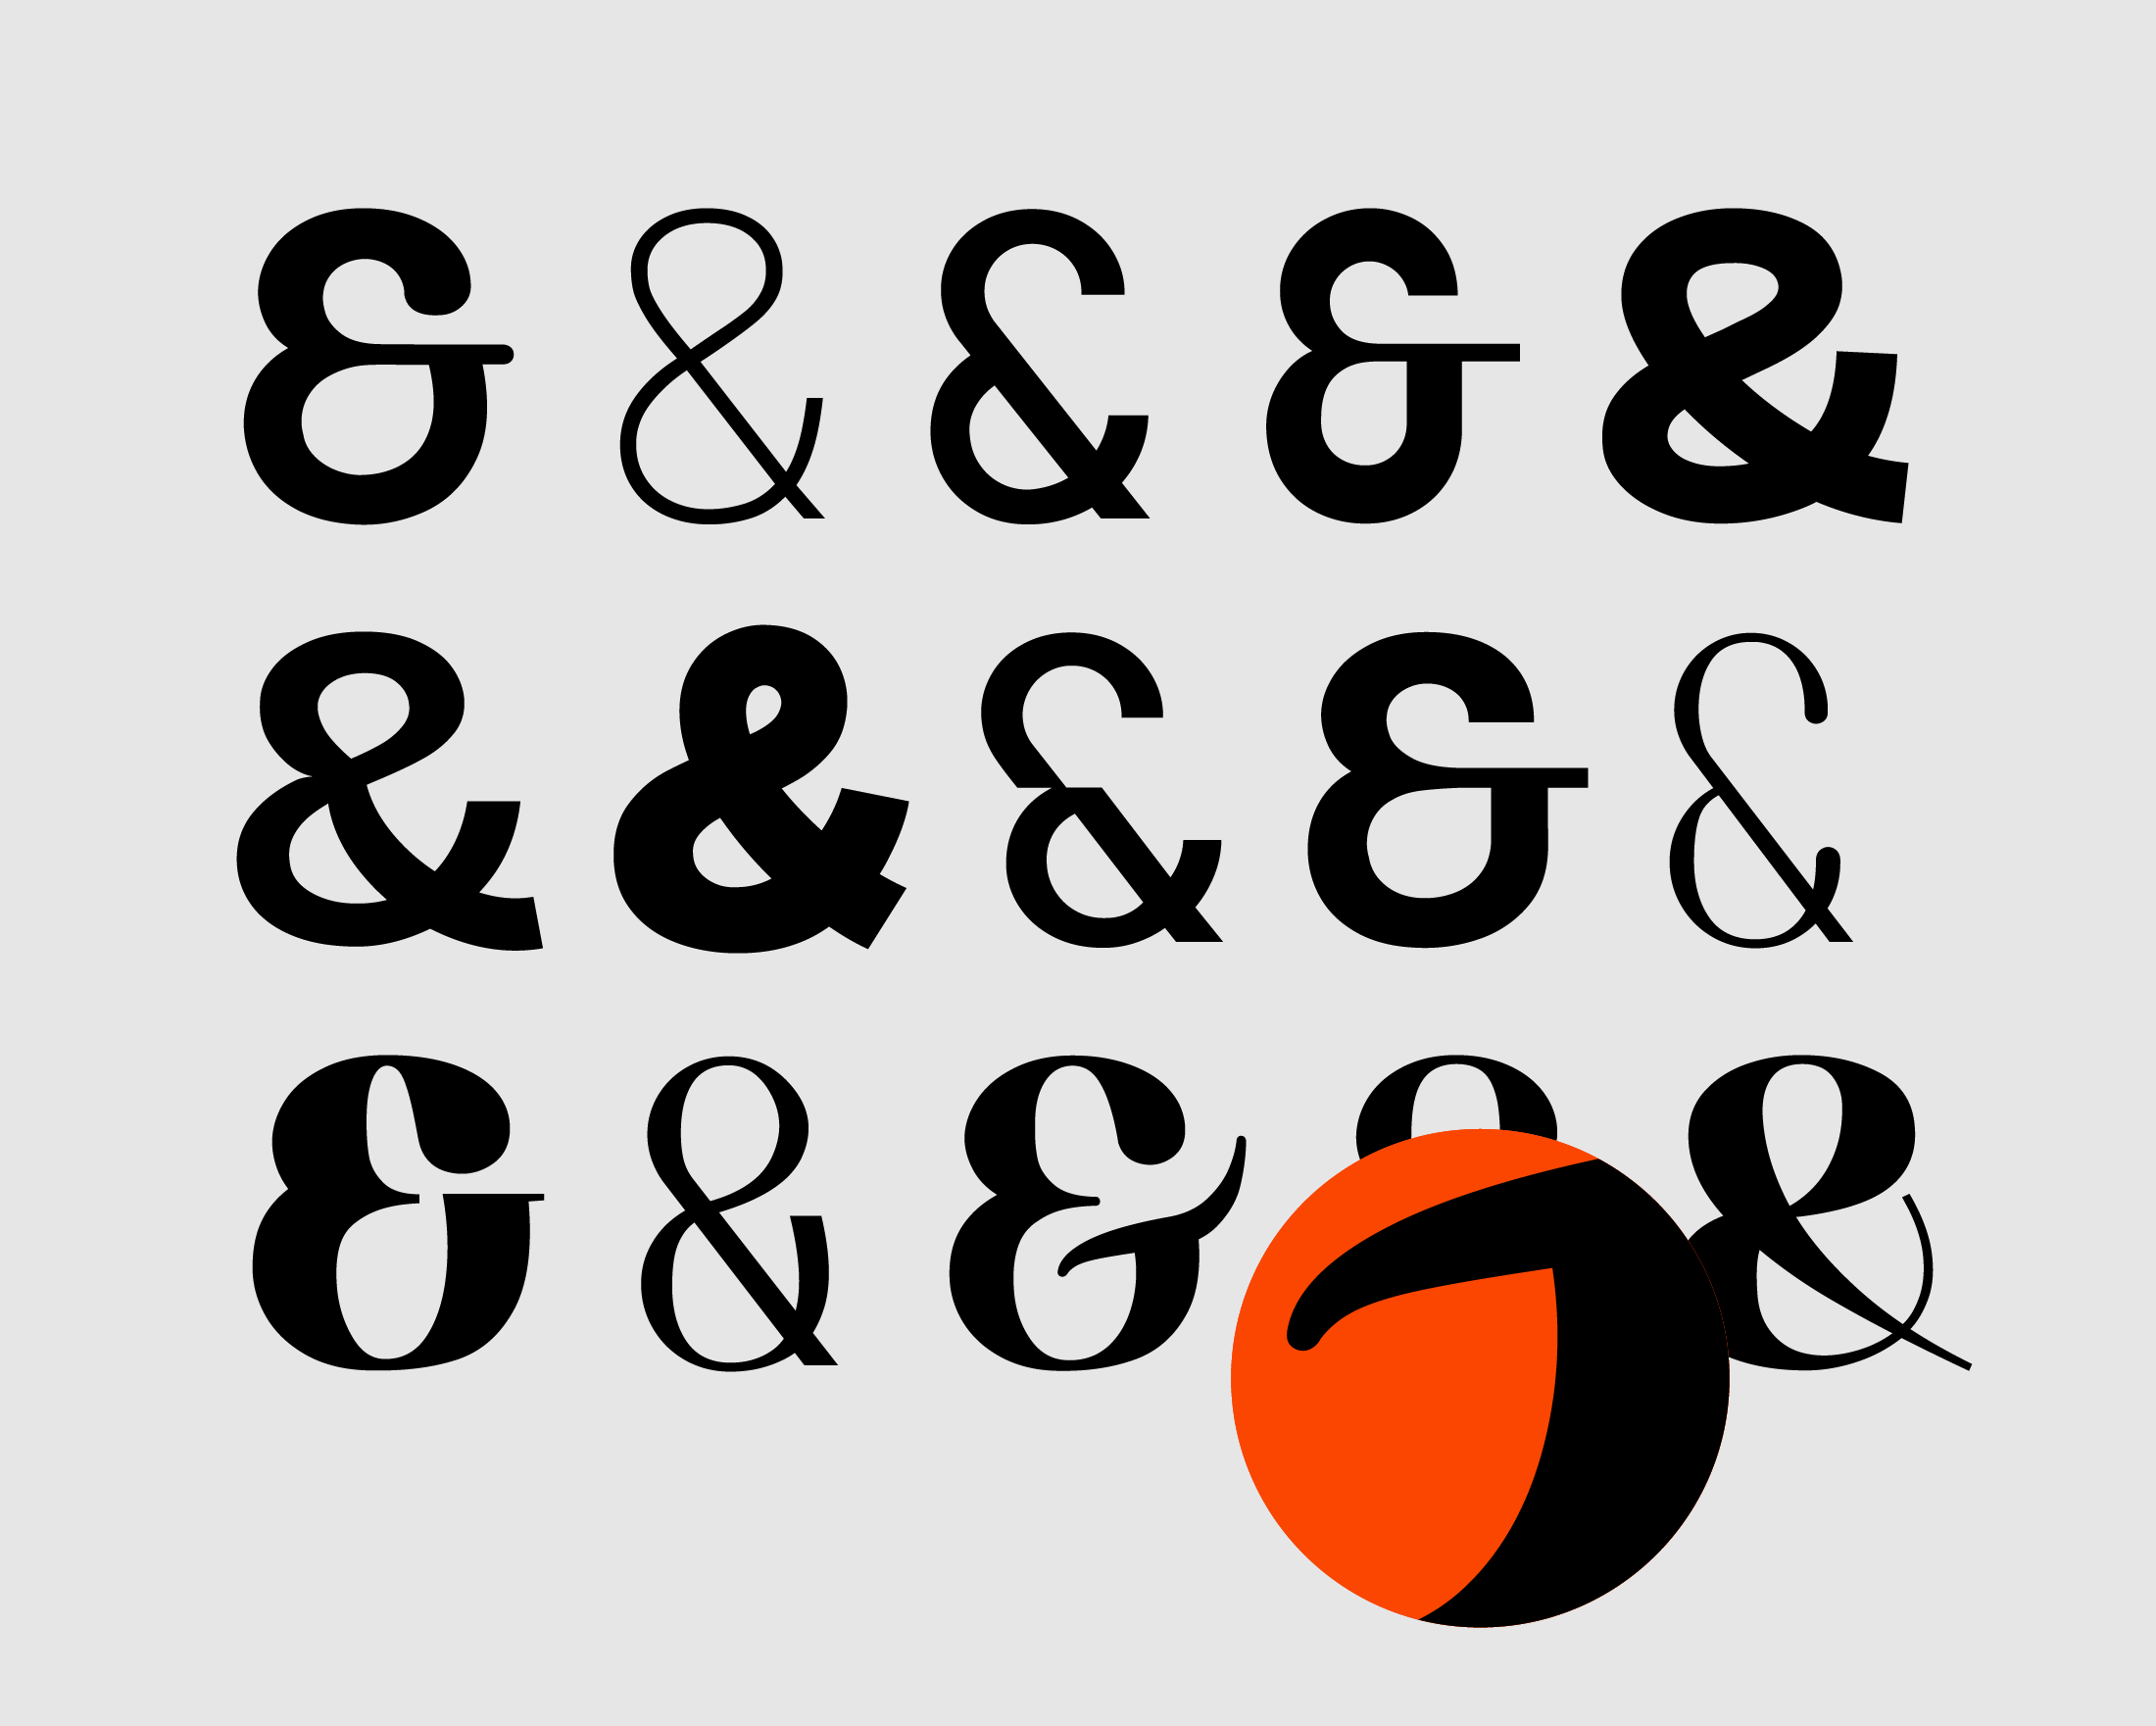 15 ampersand symbols from different fonts